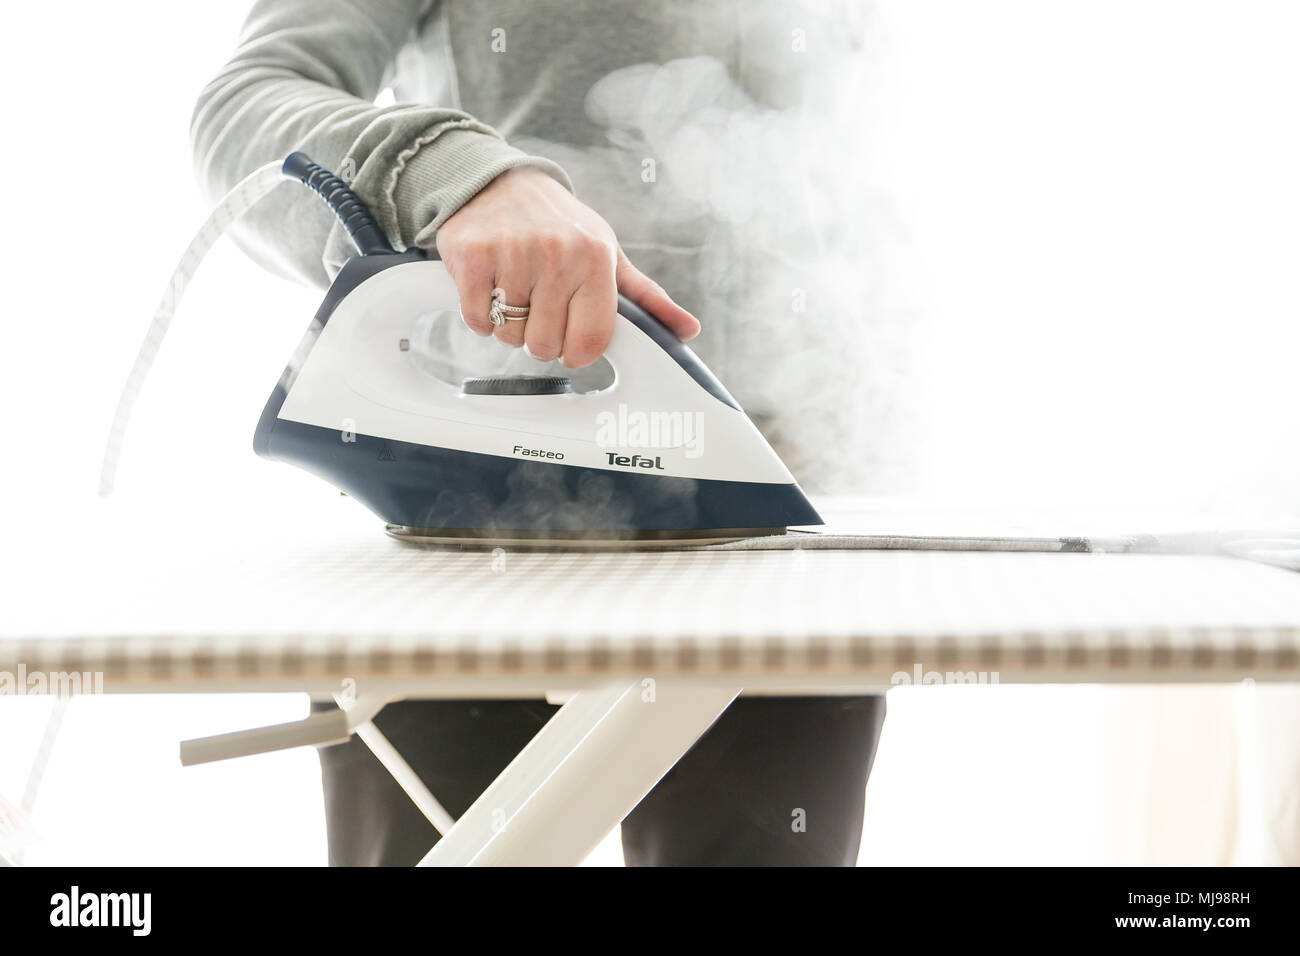 Ironing with steam generator iron. Close up of a hand moving hot steaming iron on the ironing board and removing wrinkles from fabric. Stock Photo